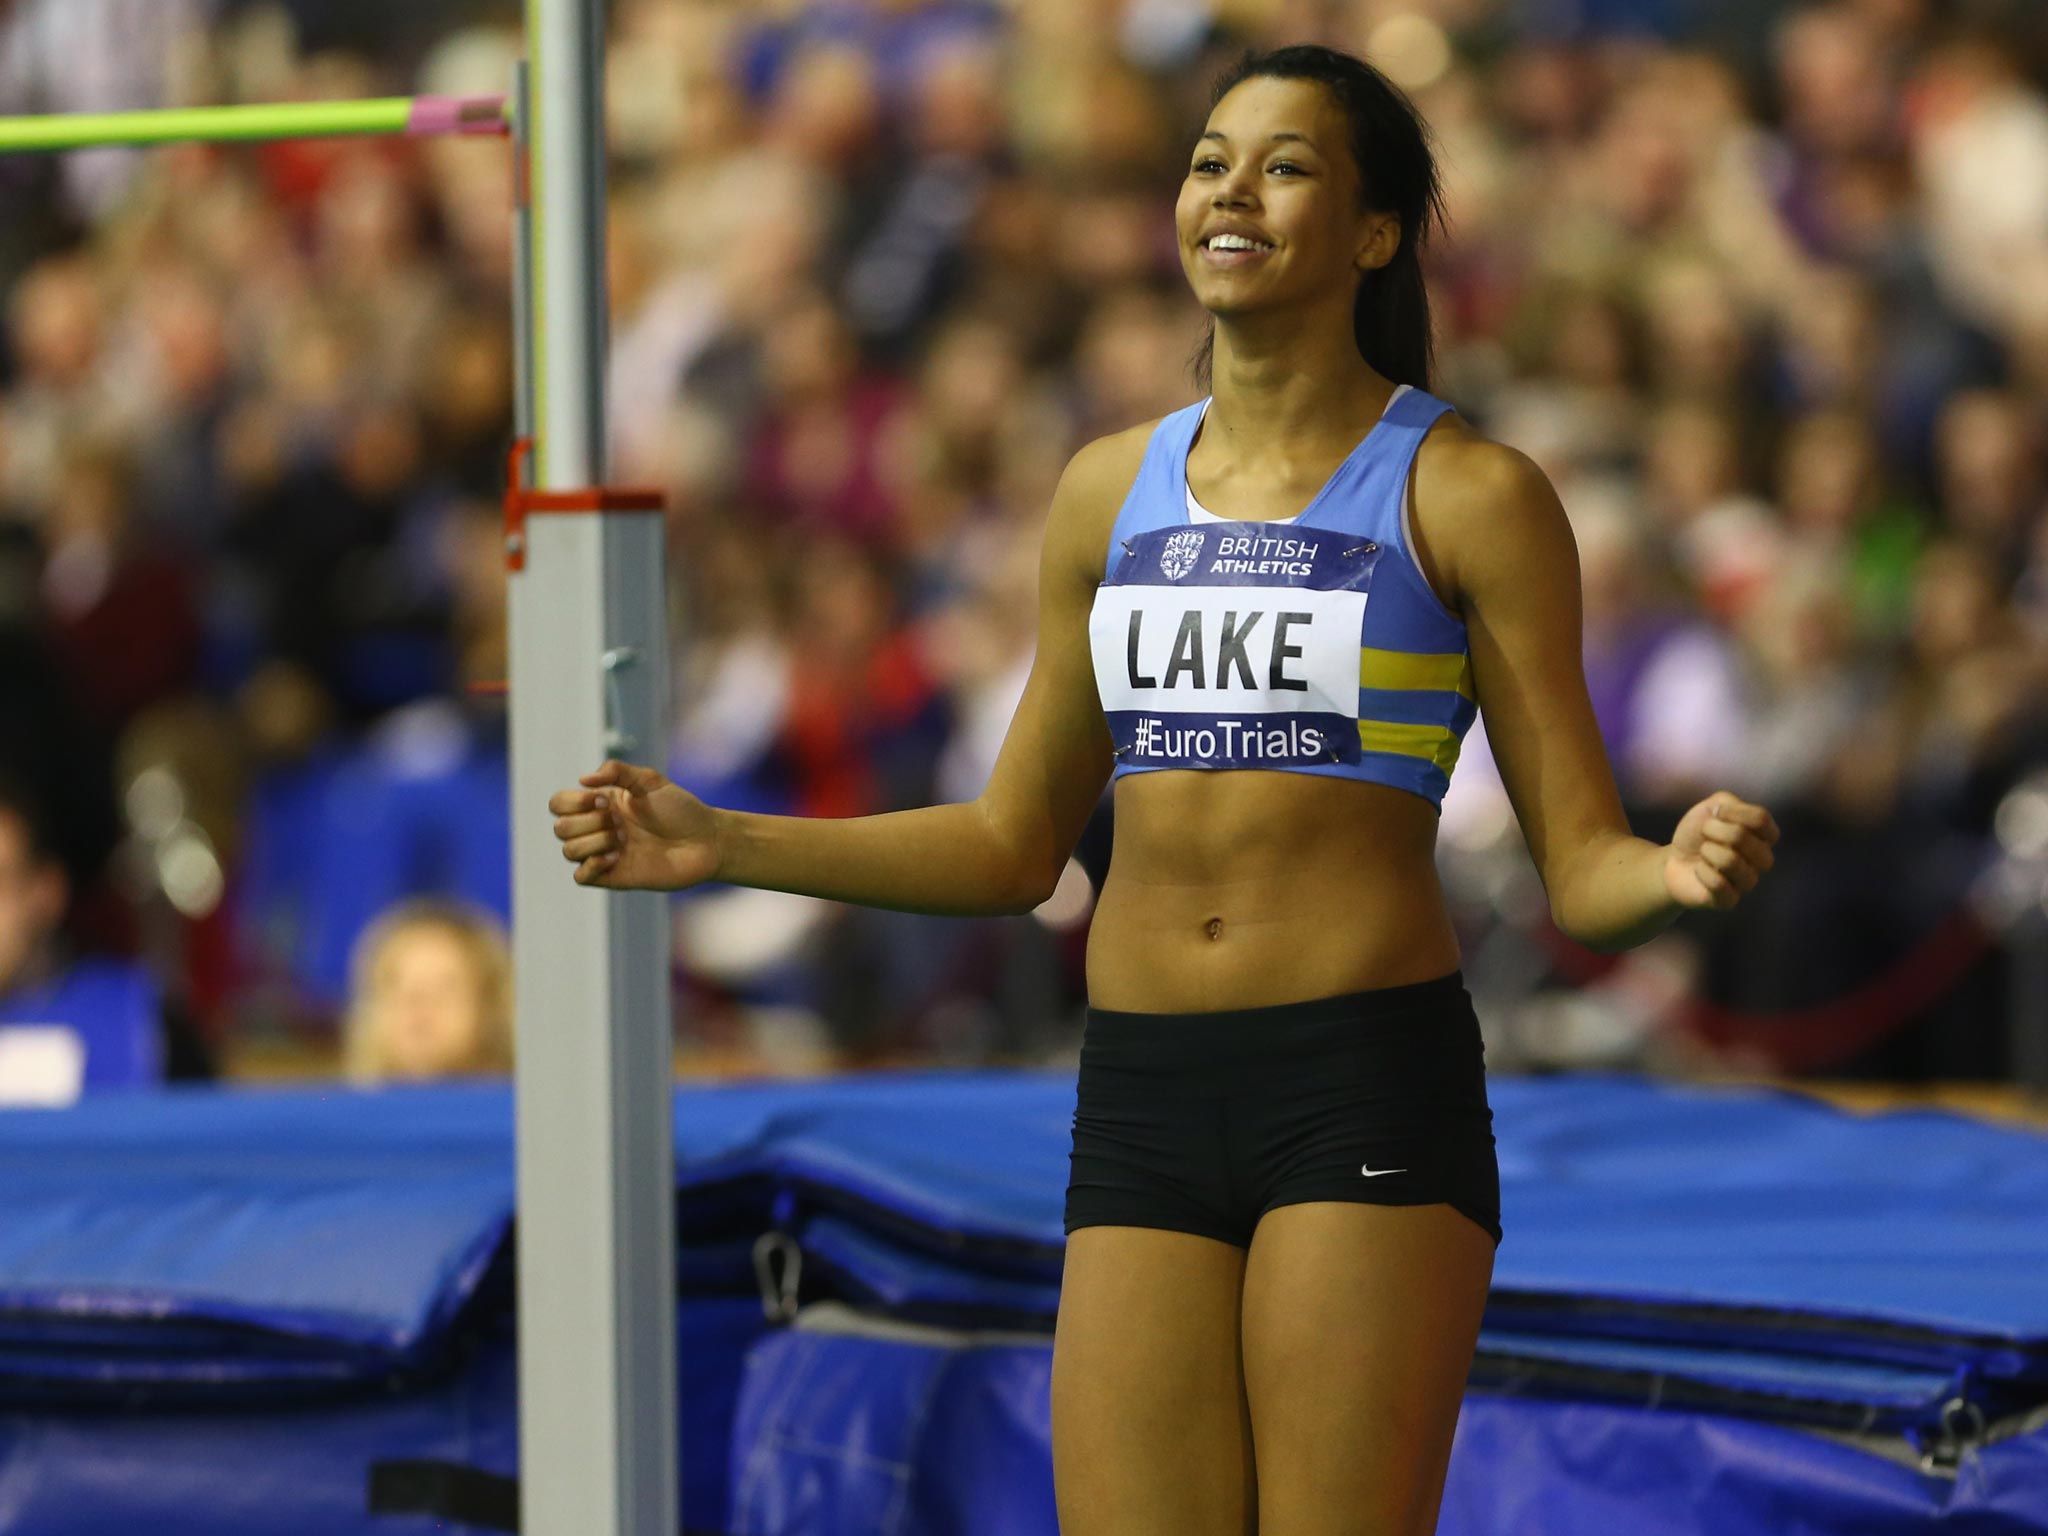 Morgan Lake is tipped to follow in Jessica Ennis-Hill’s footsteps